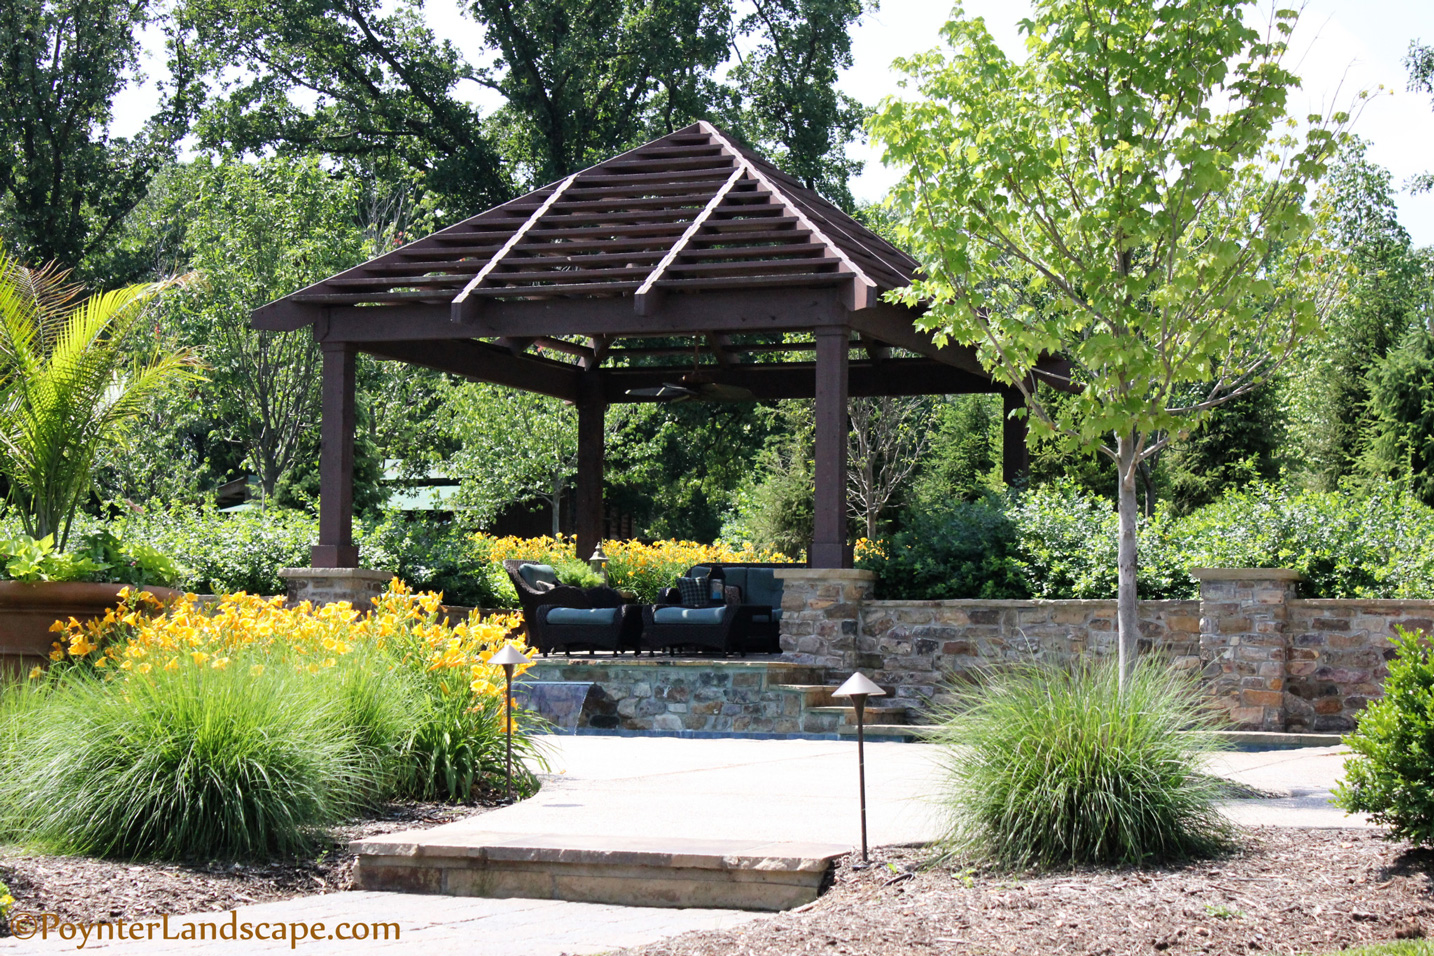 Outdoor Landscaping Company Dardenne Prairie, MO | Dardenne Prairie, MO Landscaping | Poynter Landscape